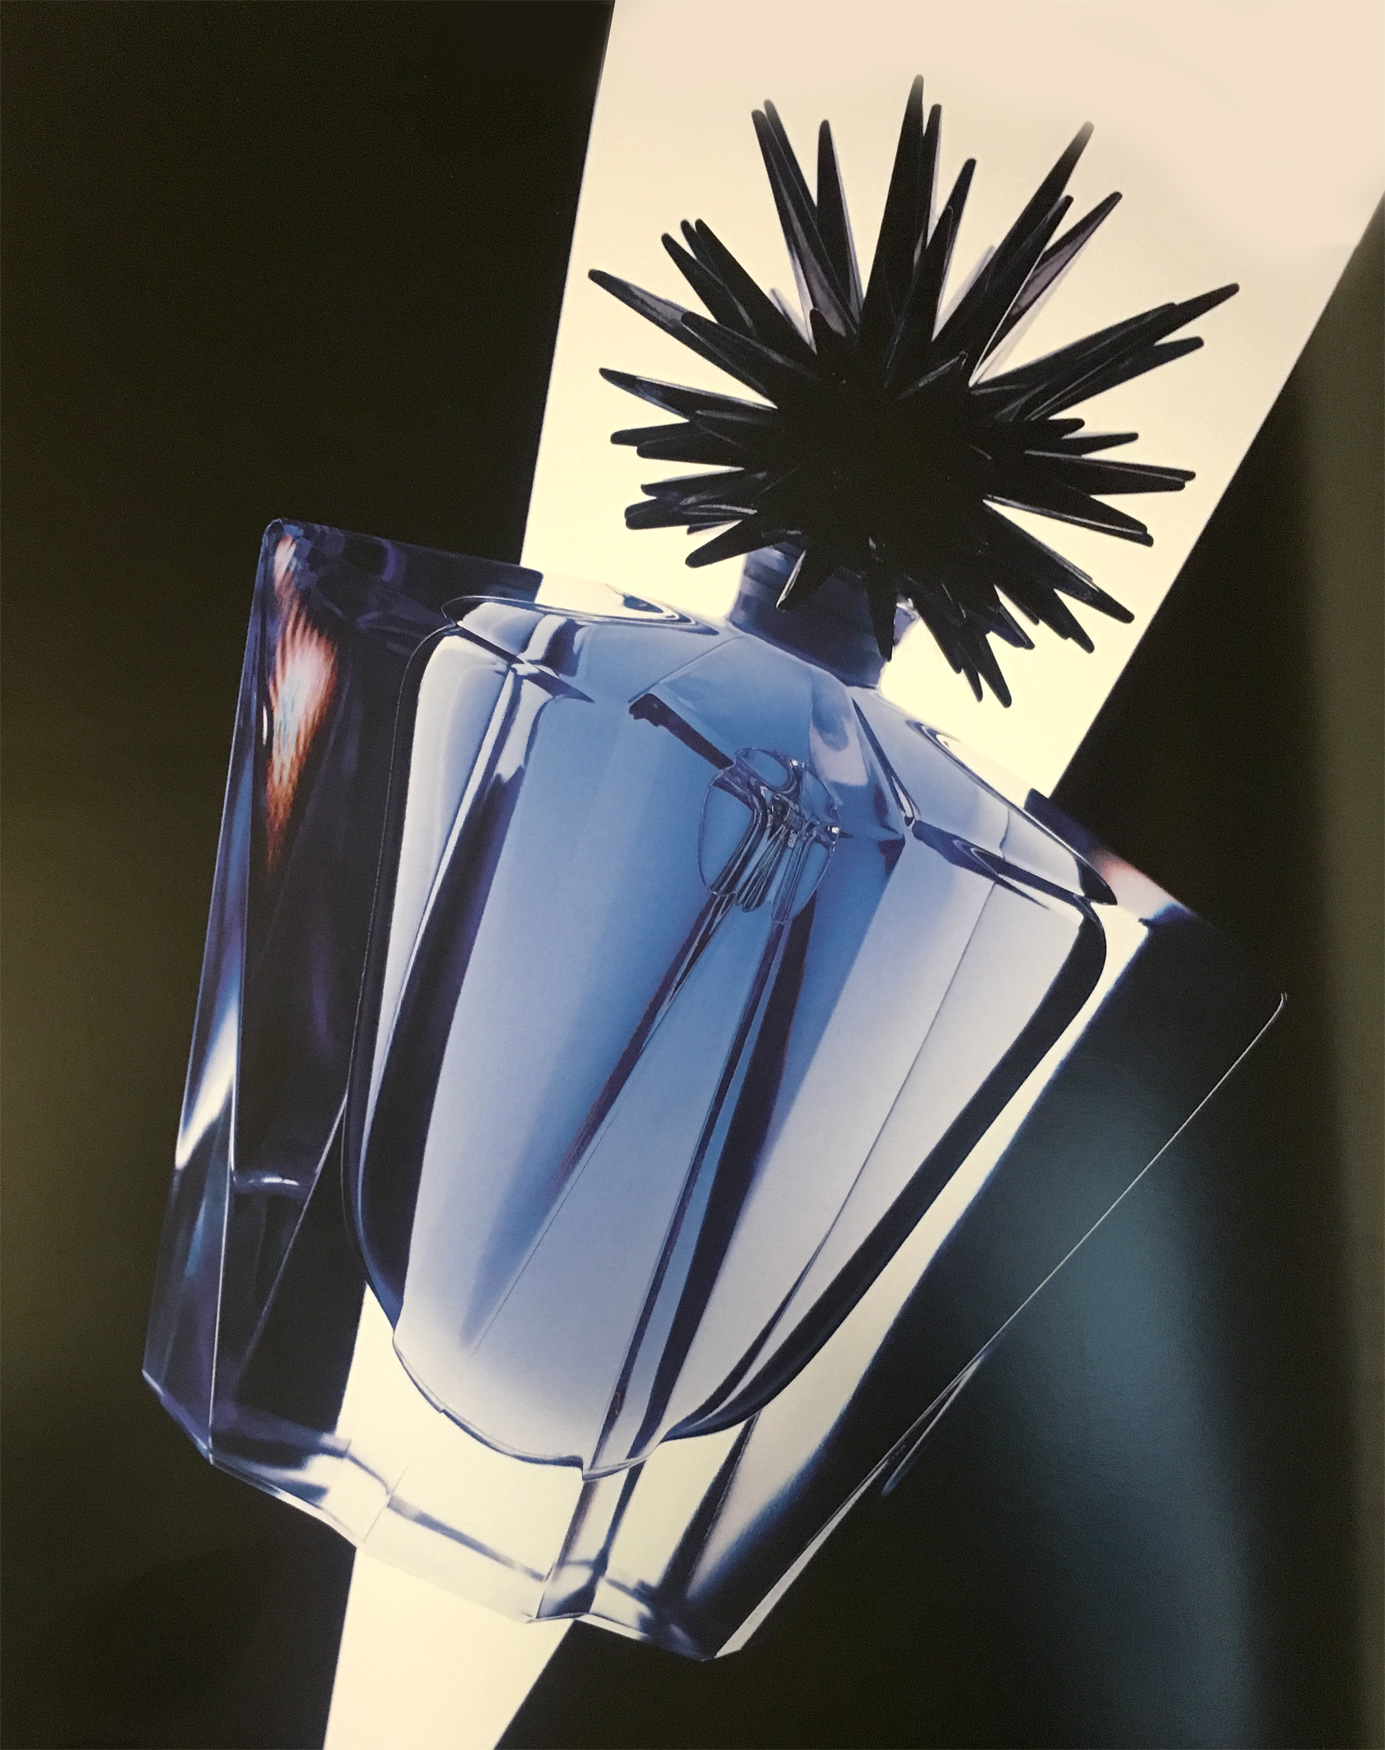 Scan of Mugler Brotchure promoting the Glamour Collection of Purse Spray and Star Etoile Bottle of 1998.